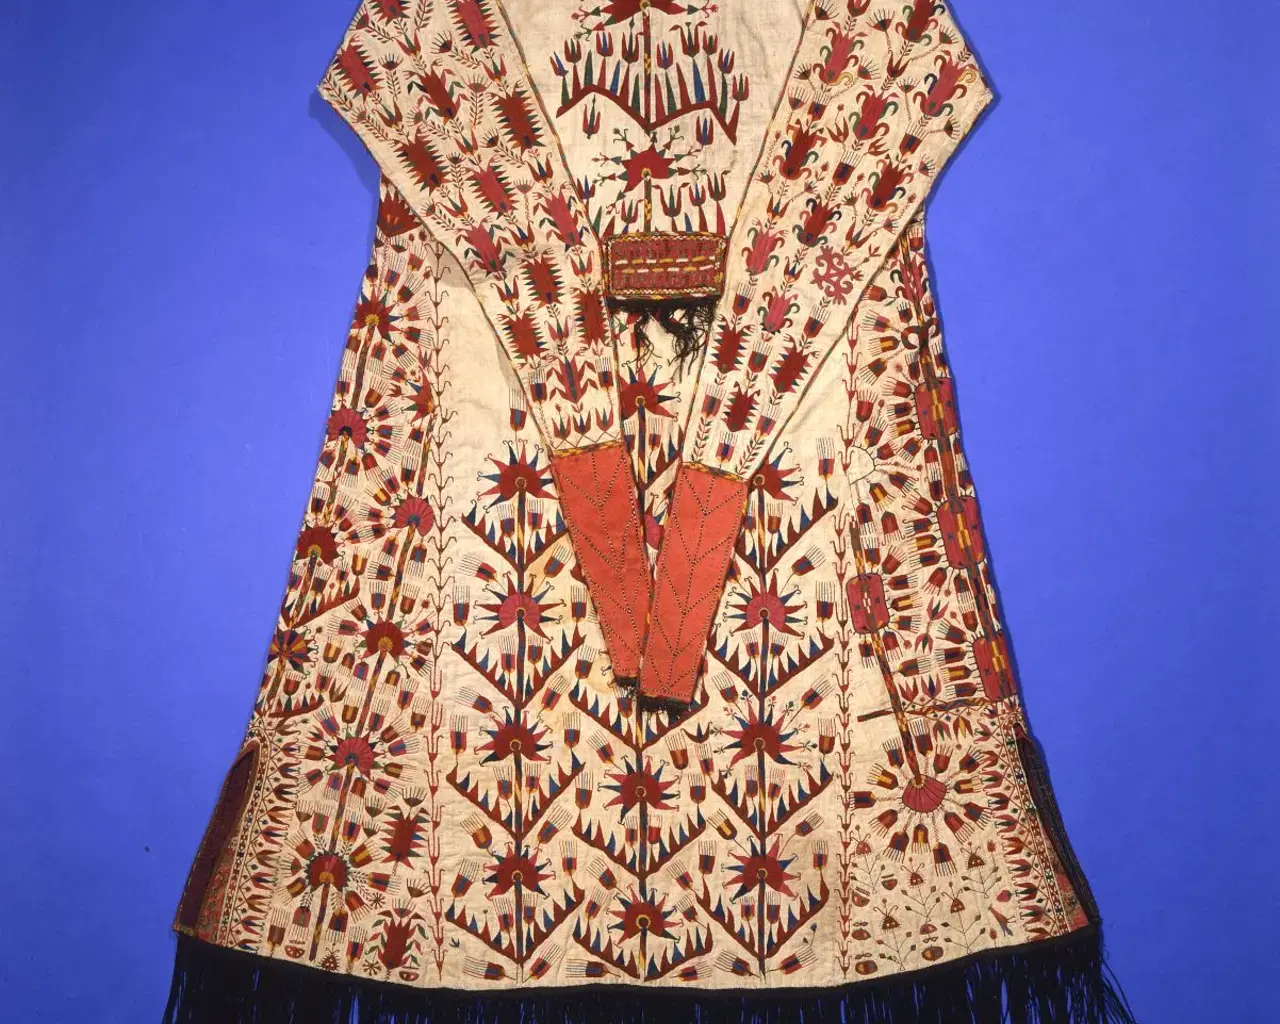 Women&#39;s coat (Ak Chirpi), multi-color hand-embroidered robe with fringe along edge of hem., from Central Asia, Turkmenistan, made ca. 1890, purchased for the Penn Museum from A. Barsa in 1913. Photo courtesy of Penn Museum.